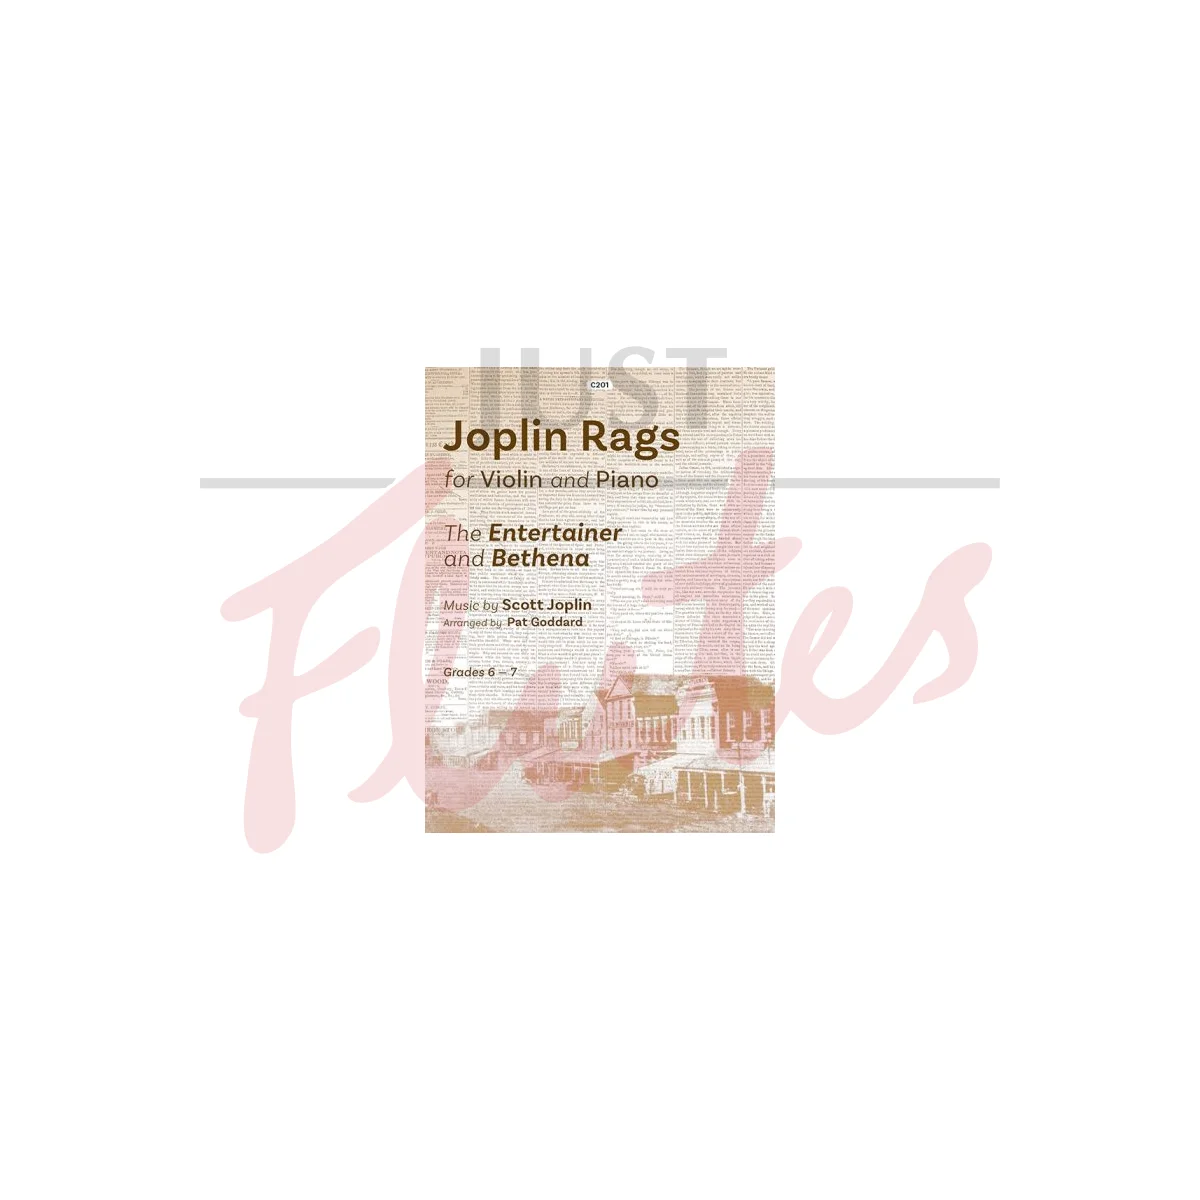 Joplin Rags for Violin and Piano